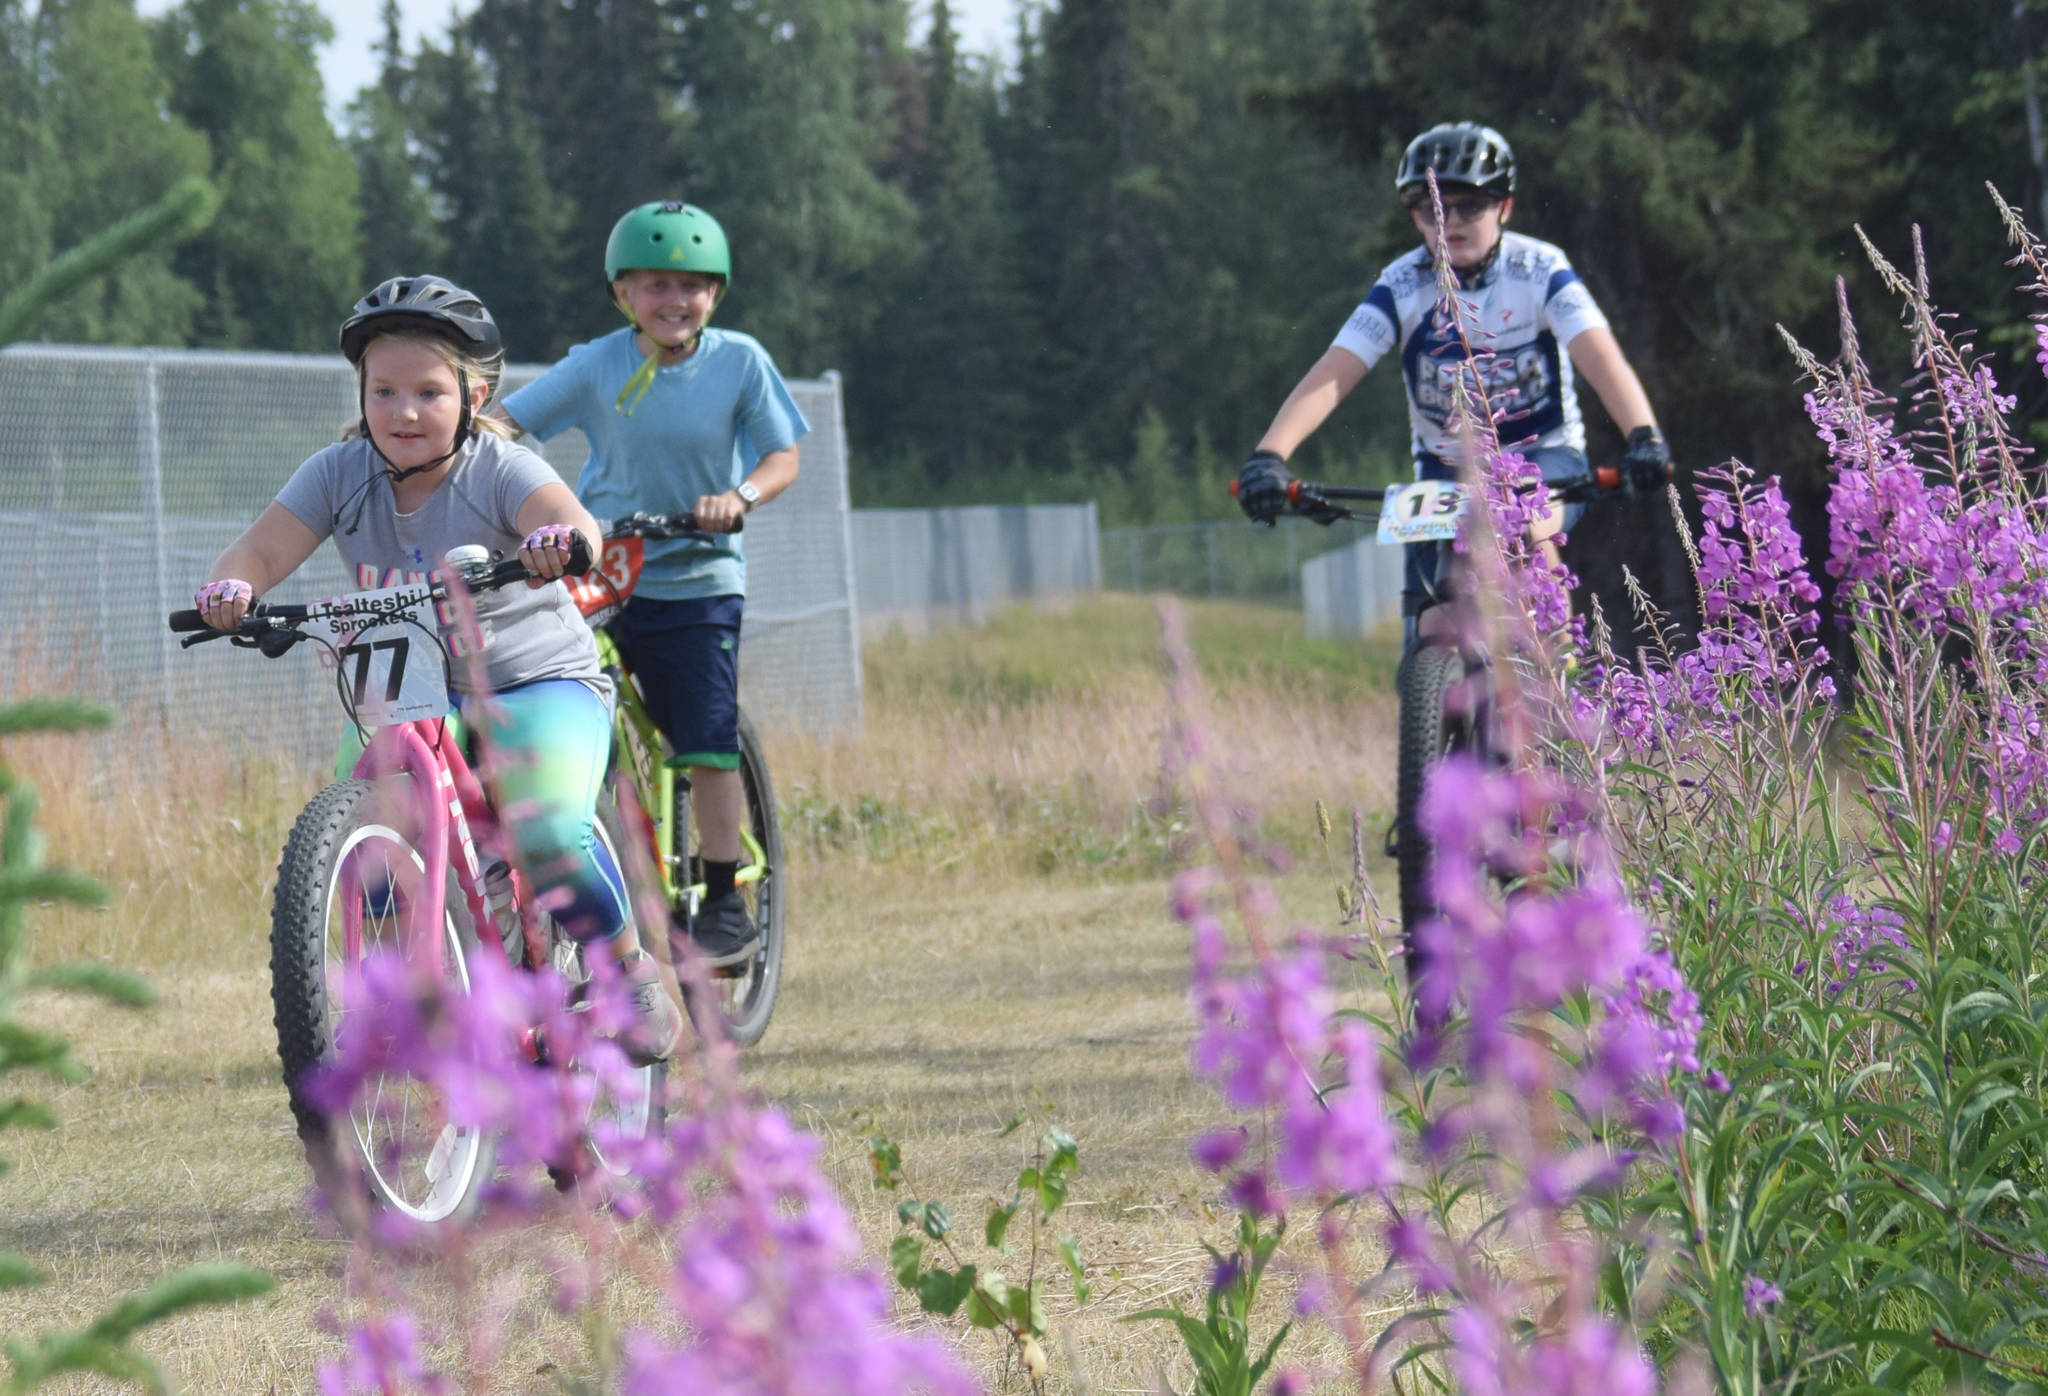 Addie Moore, 7, of Soldotna leads sweeper Will Smith, 12, of Kenai and Landen Showalter, 12, of Soldotna in the kids ramble at the Soldotna Cycle Series on Thursday, July 18, 2019, at Tsalteshi Trails. (Photo by Jeff Helminiak/Peninsula Clarion)